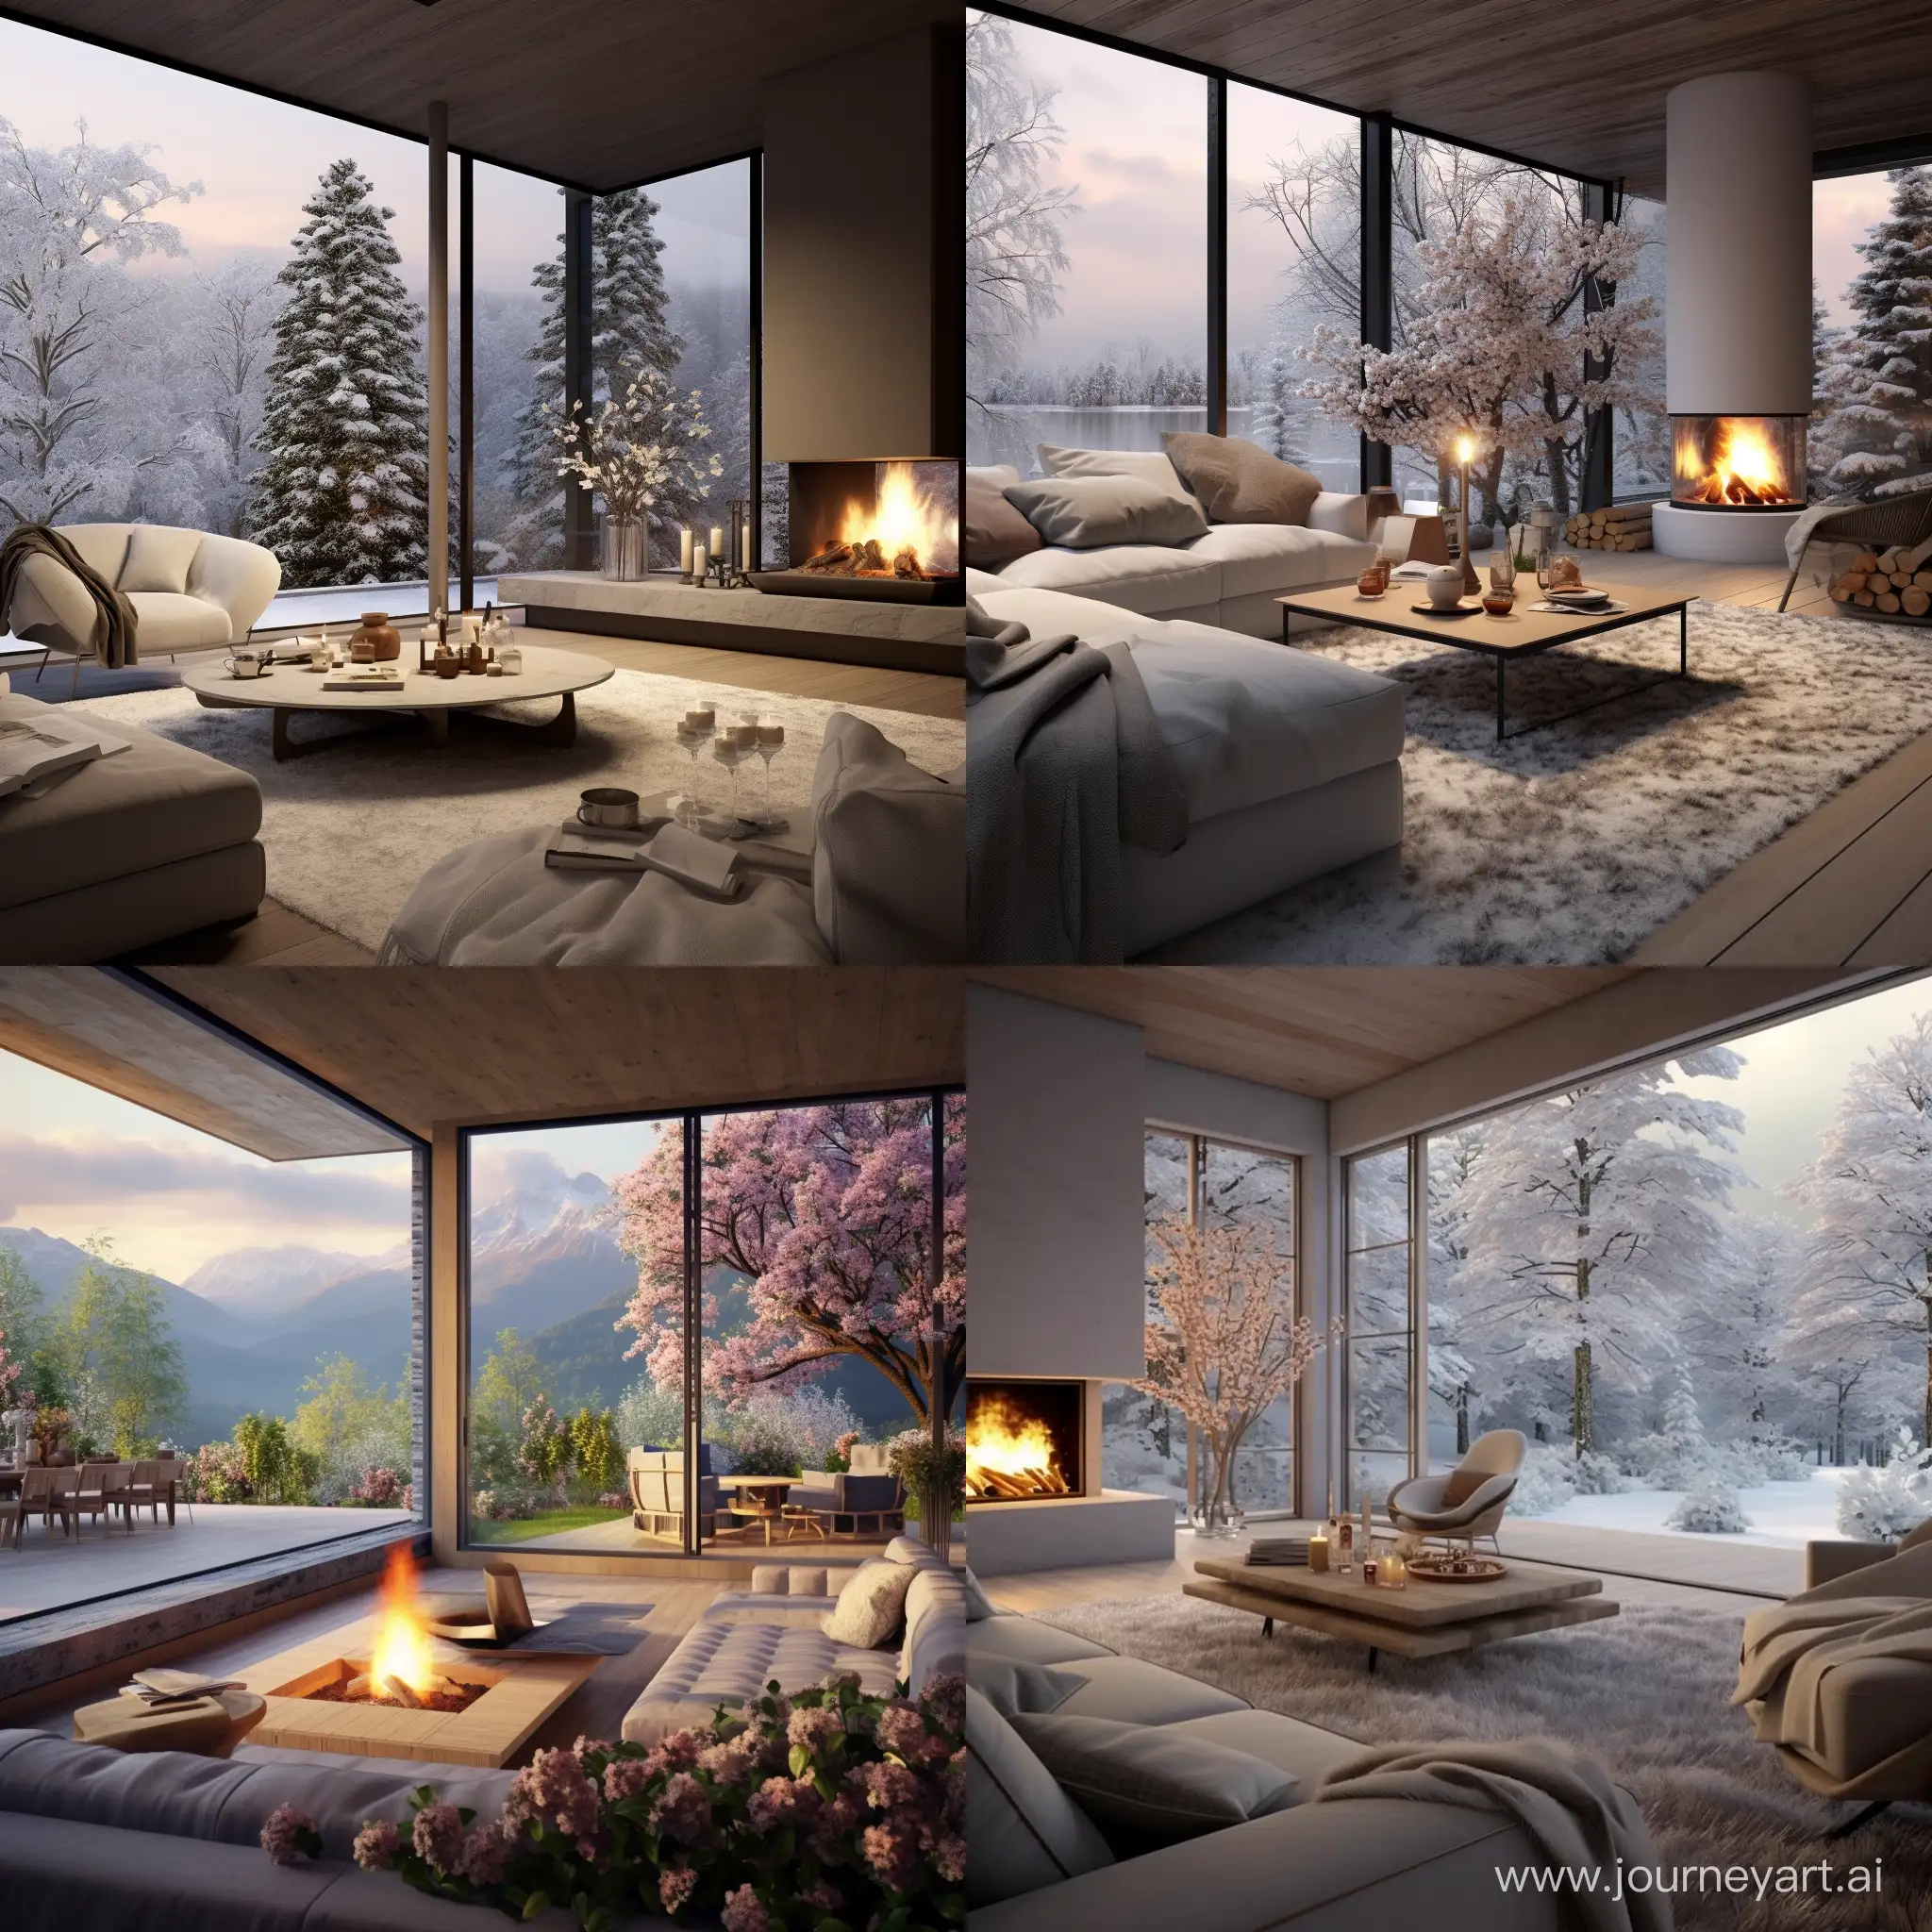 Cozy-Winter-Living-Room-with-Fireplace-and-Garden-View